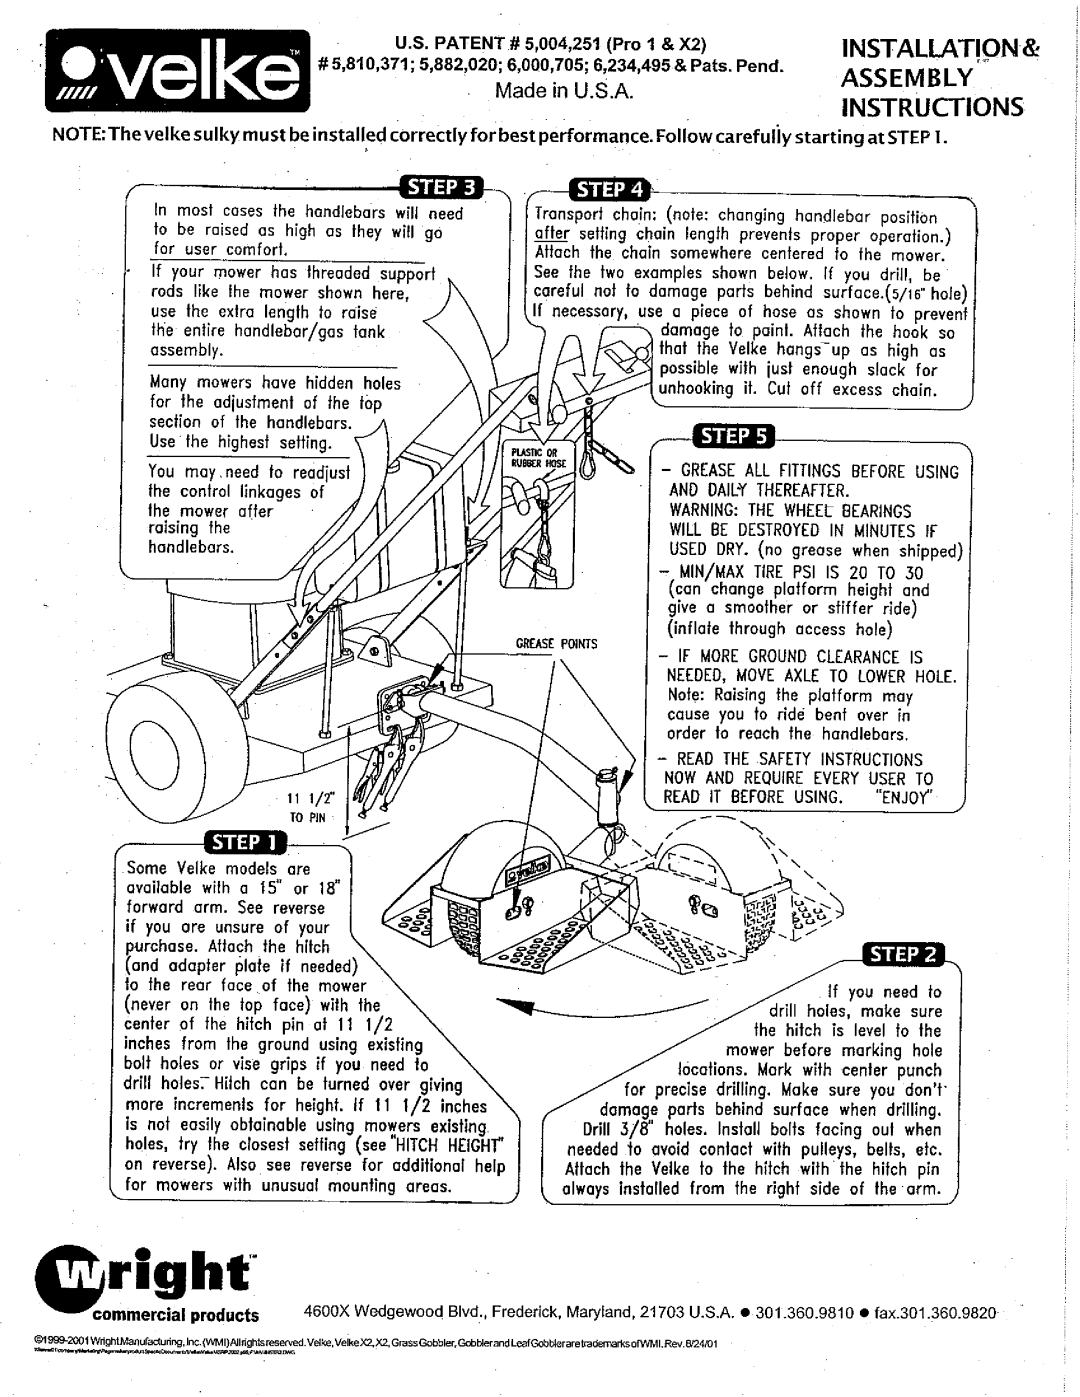 Wright Manufacturing B)-15, VK200-2, SC installation instructions 